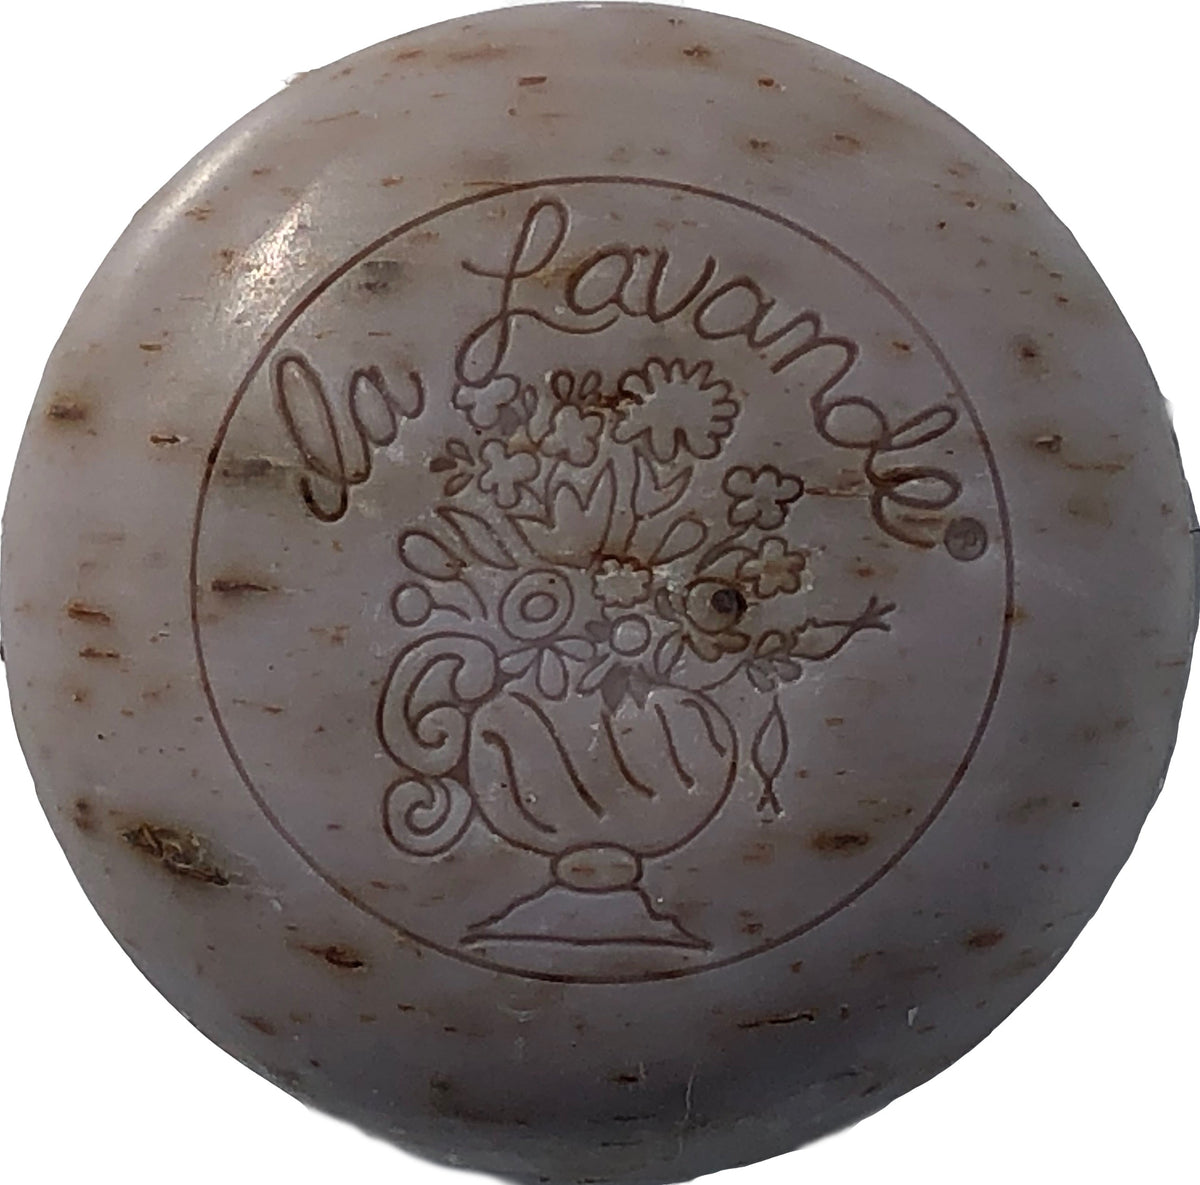 Round, beige-colored La Lavande Round Lavender Flower Soap with the words "la lavande" engraved above a detailed floral bouquet of lavender buds within a vase, showcasing signs of light use and minor spotting.